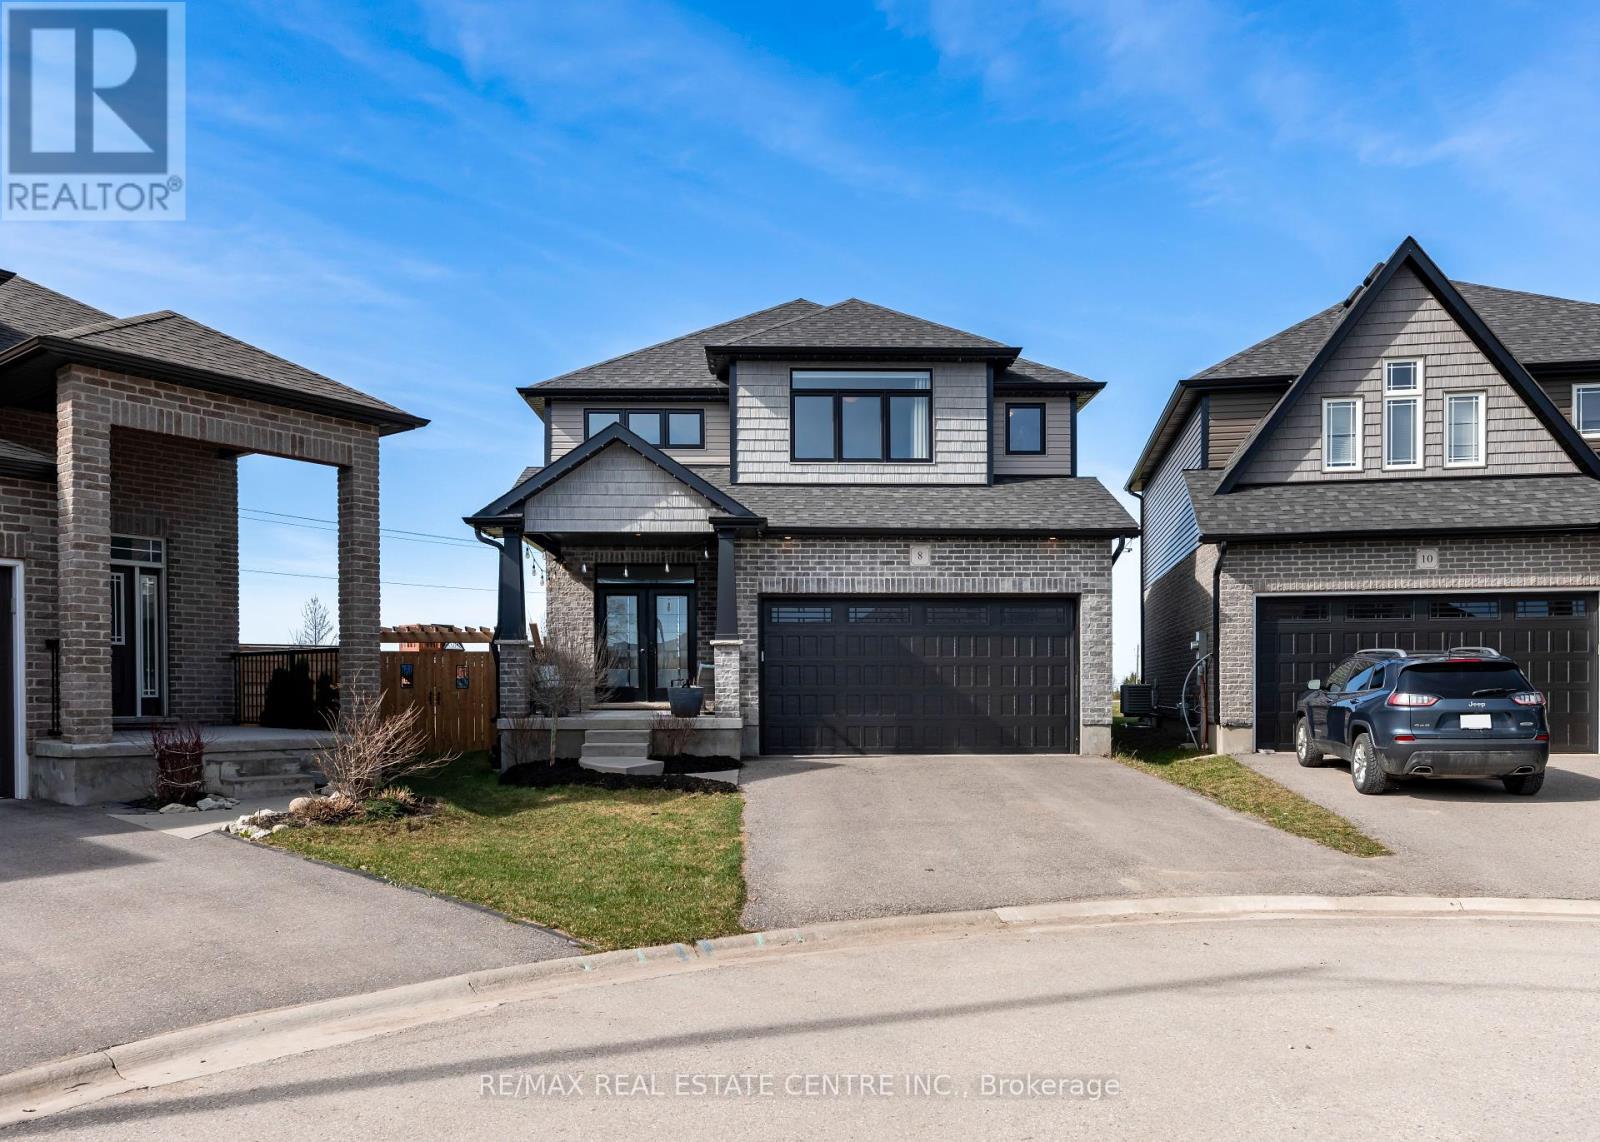 8 SPARROW CRES, east luther grand valley, Ontario